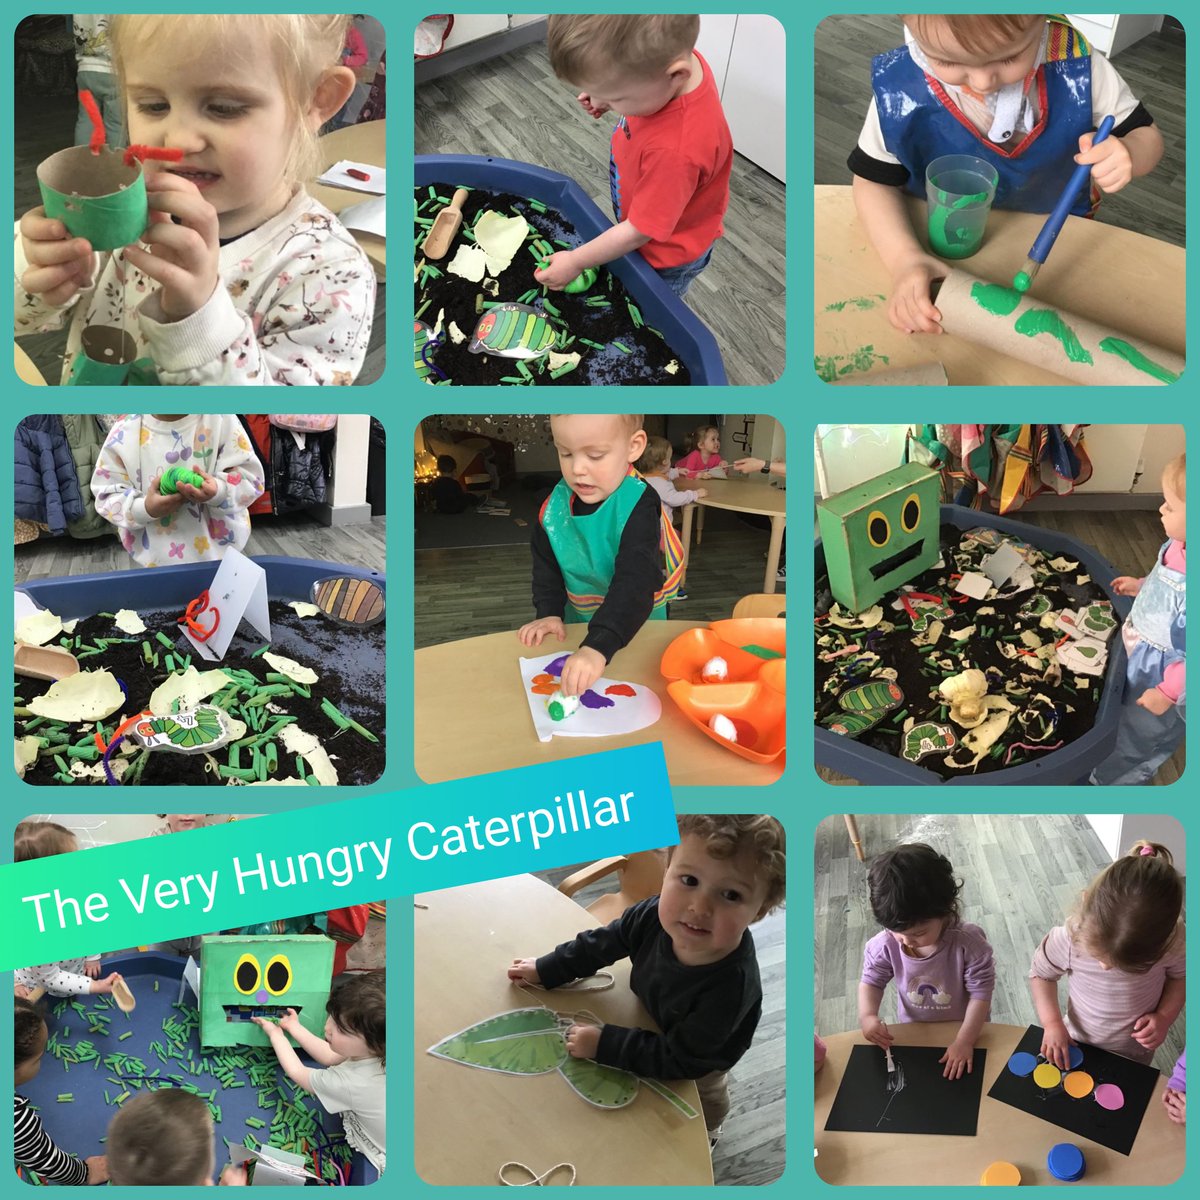 After reading the story 'The Very Hungry Caterpillar', the children enjoyed threading leaves, creating caterpillar and butterfly pictures and models using various materials and fed the caterpillar food in the tuft tray 🐛🍃🦋🎨 #PlayLearnThrive #HindleyGreenNursery @QUESTtrust